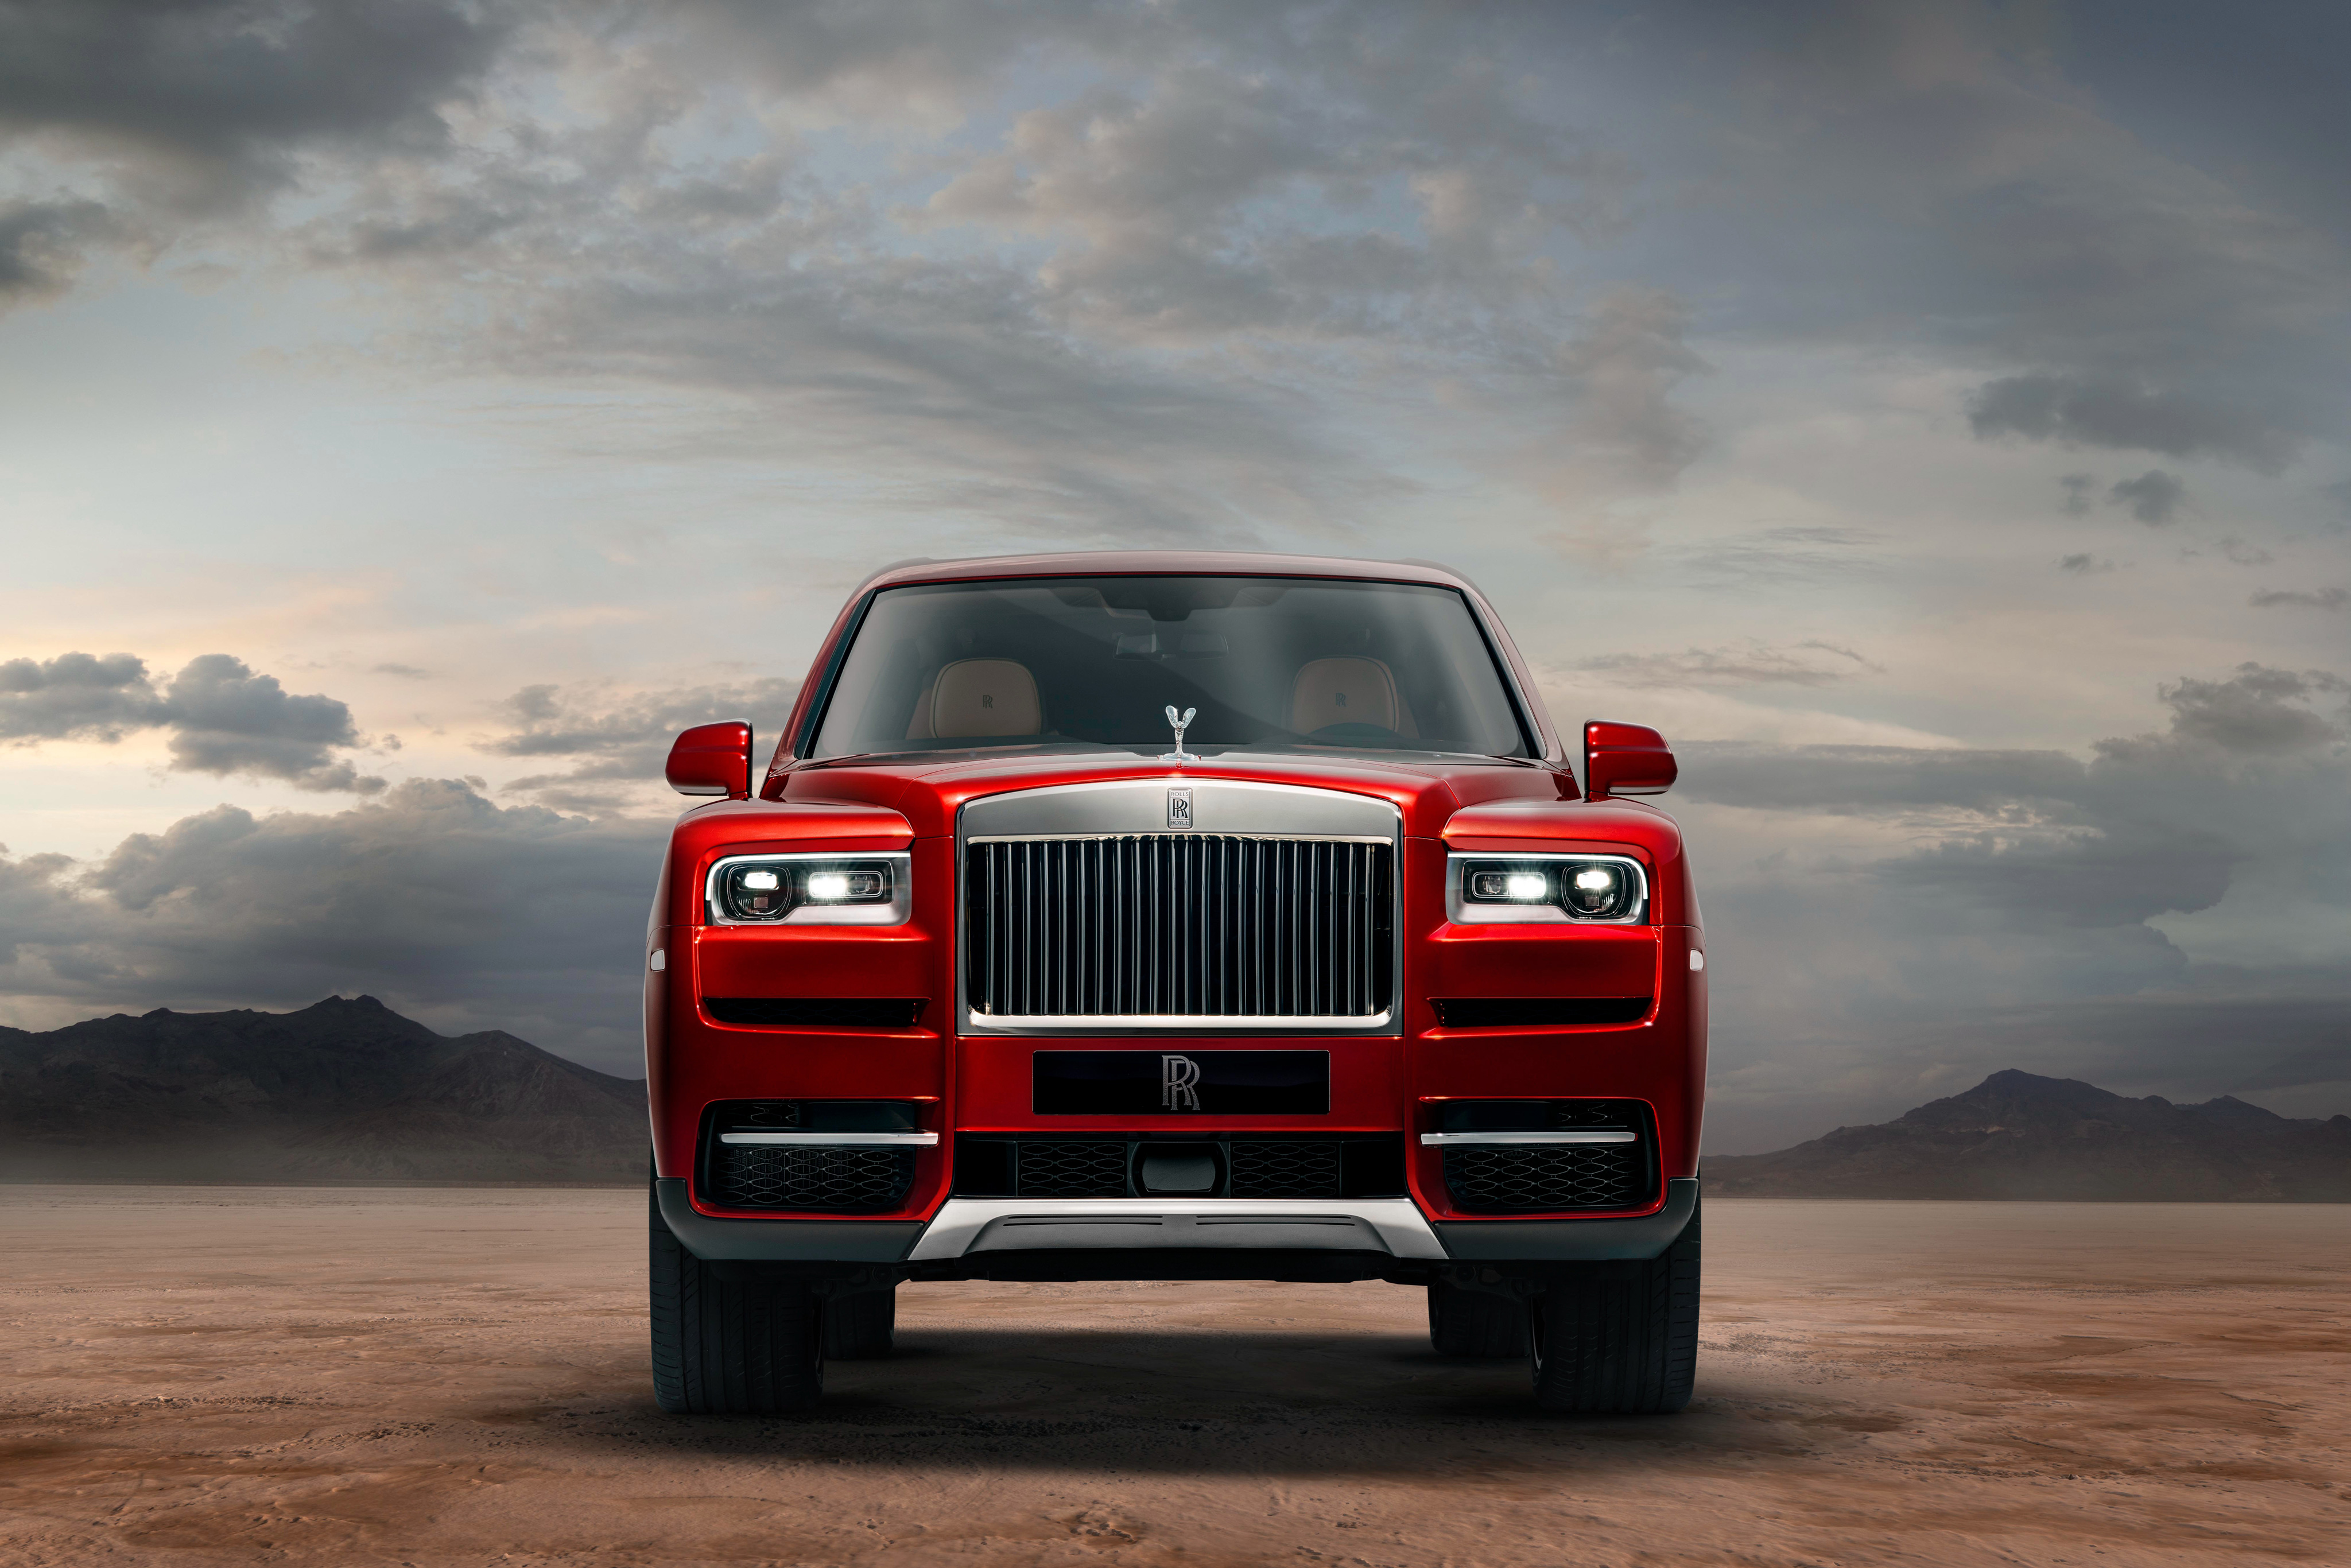 2019 Rolls Royce SUV Cullinan, HD Cars, 4k Wallpapers, Images